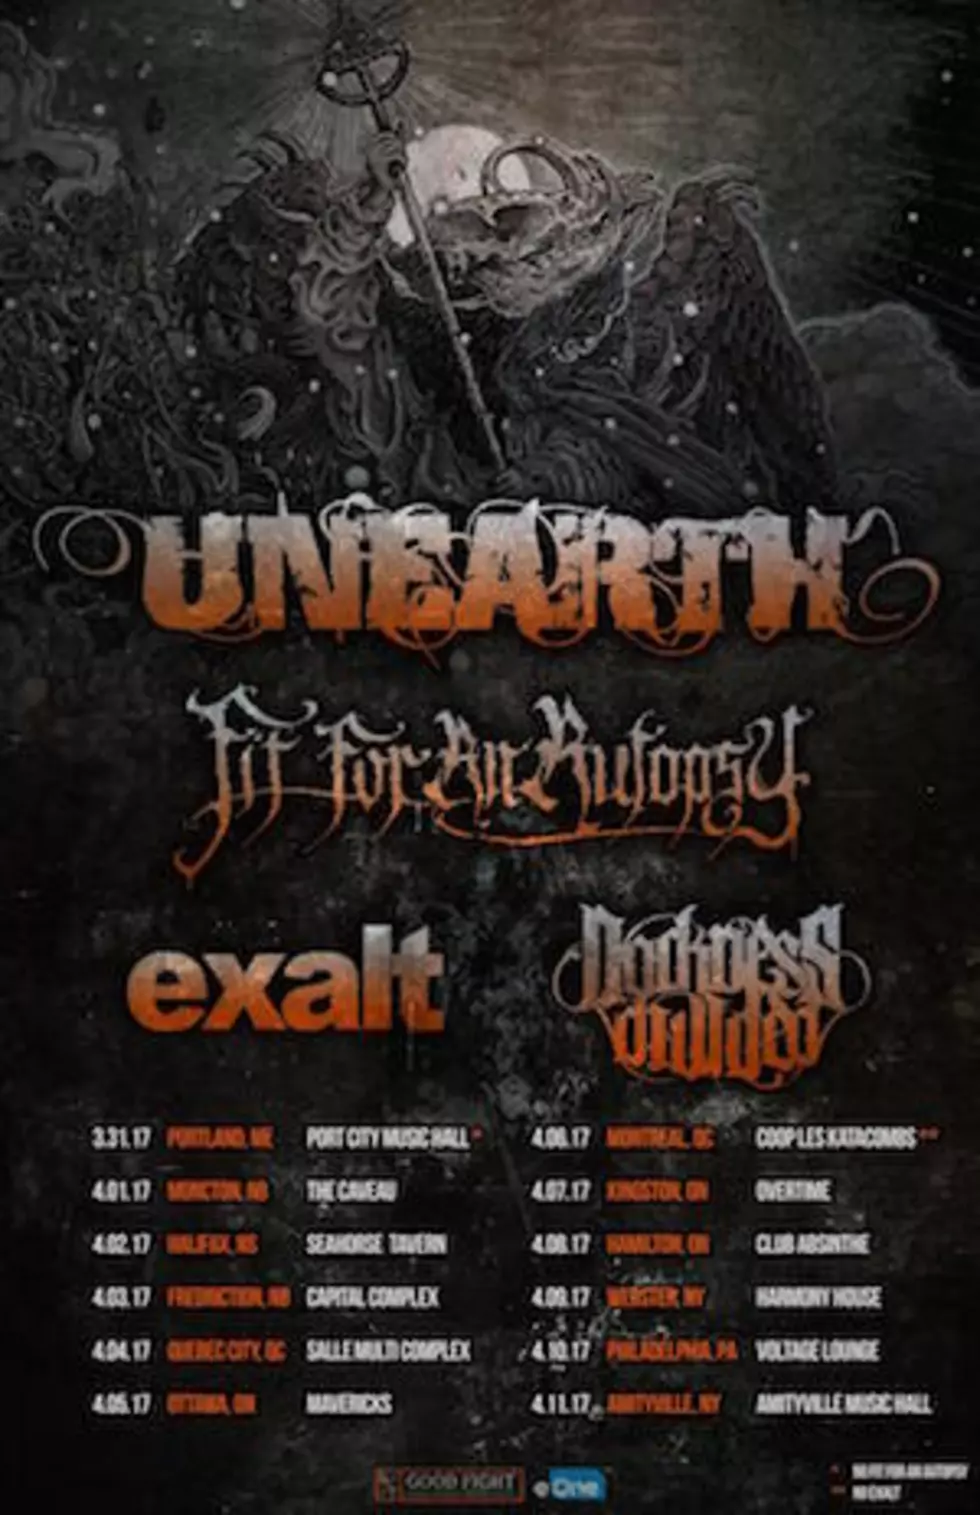 Unearth Announce 2017 Tour With Fit For an Autopsy + More